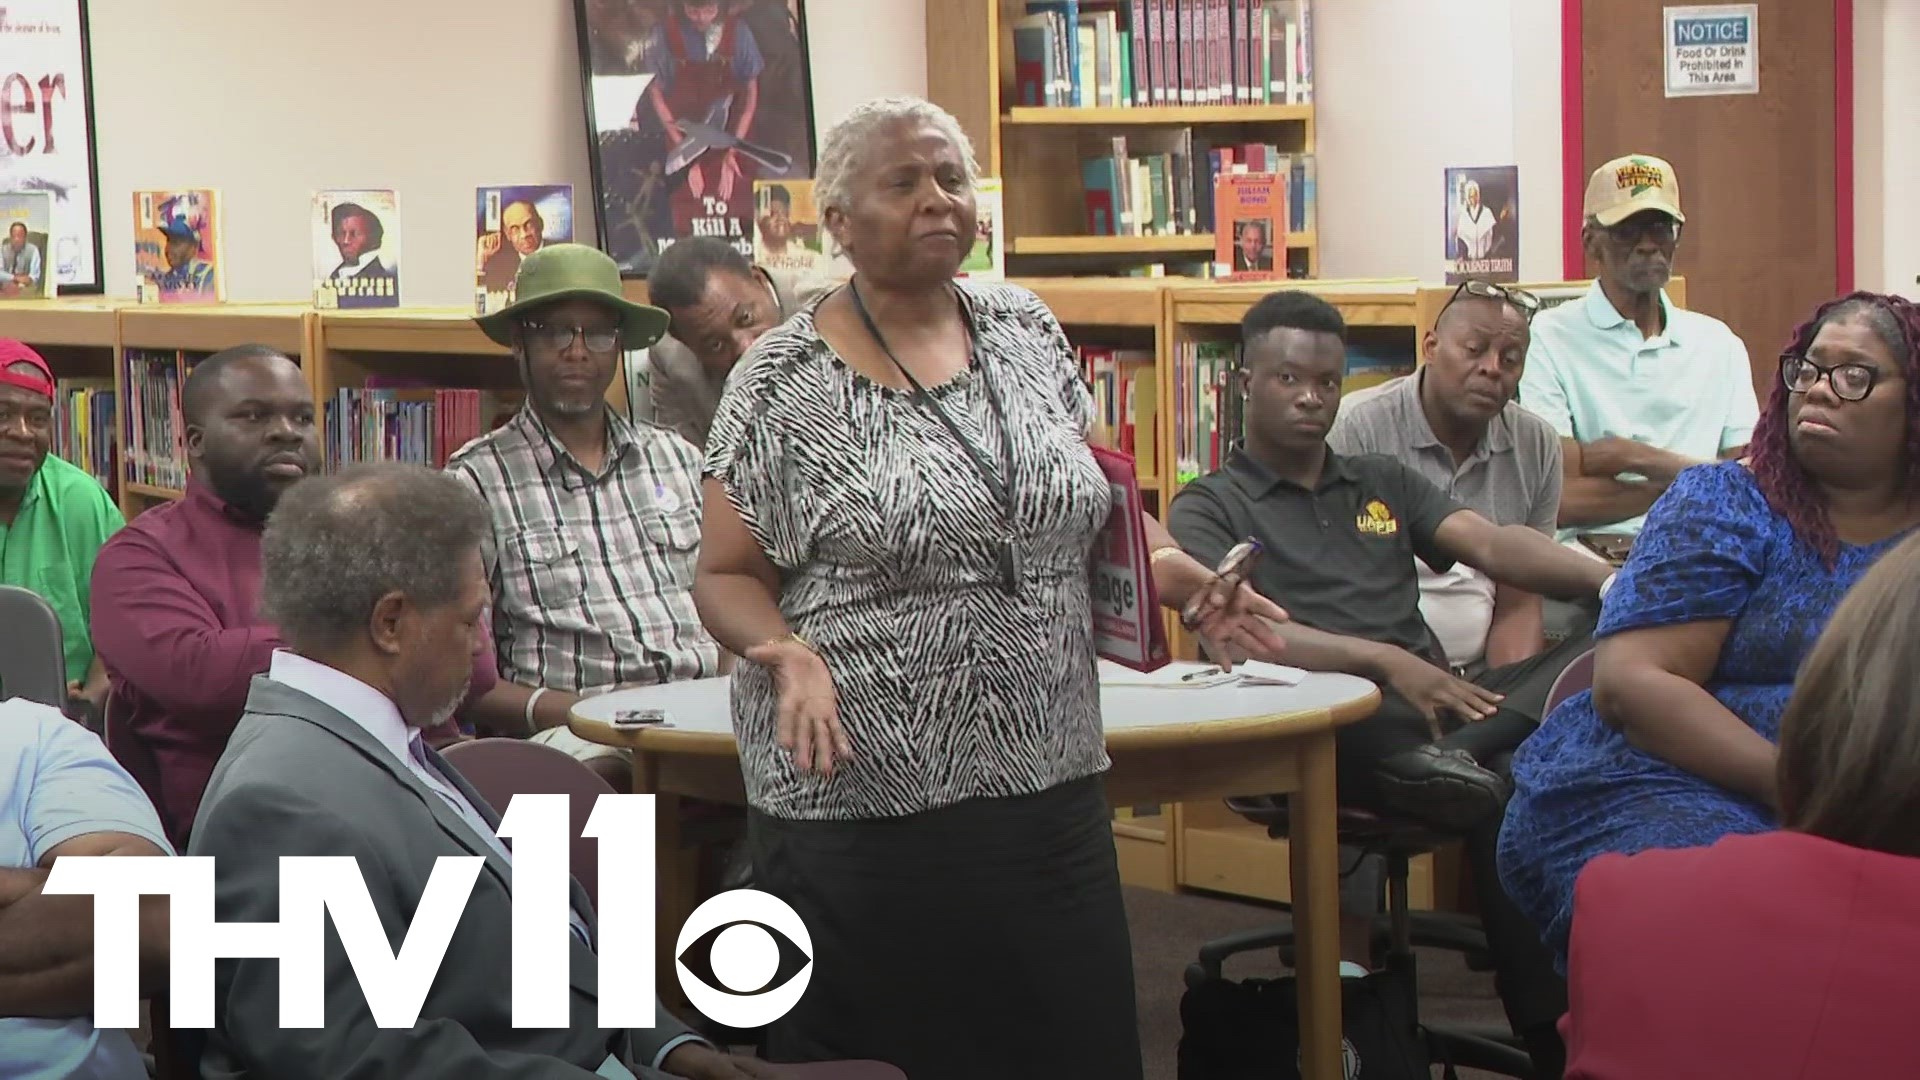 Early voting is underway in Pine Bluff for a millage increase, but on Wednesday, the school board met with the community to address any questions or concerns.